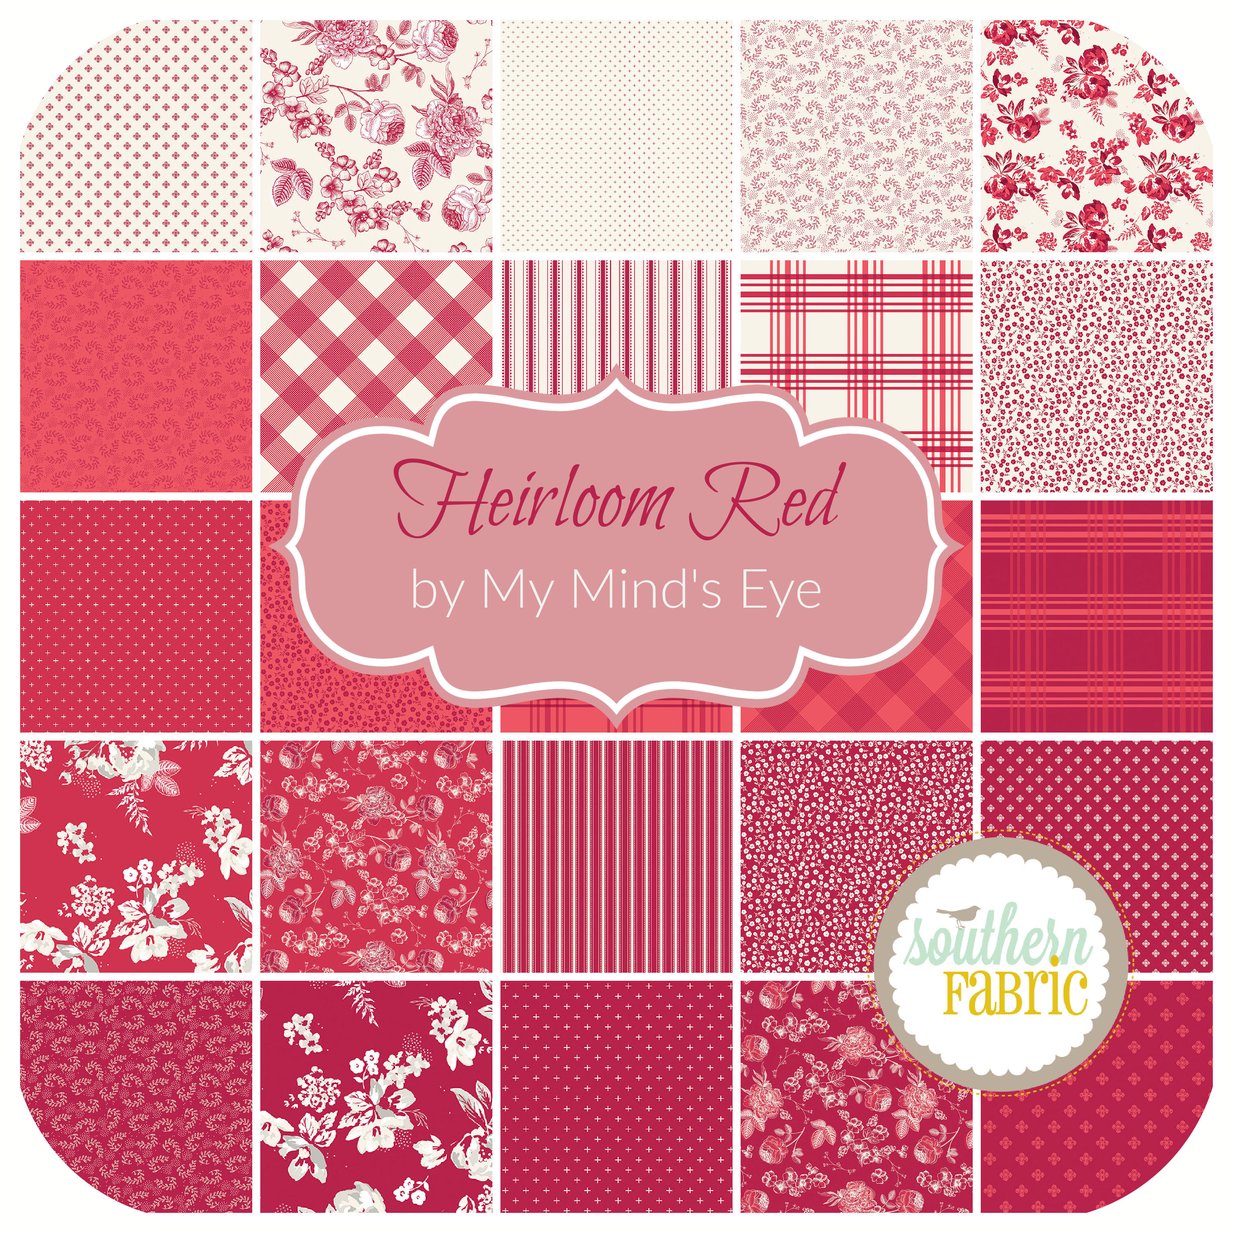 Heirloom Red Jelly Roll (40 pcs) by My Mind's Eye for Riley Blake (RP-14340-40)